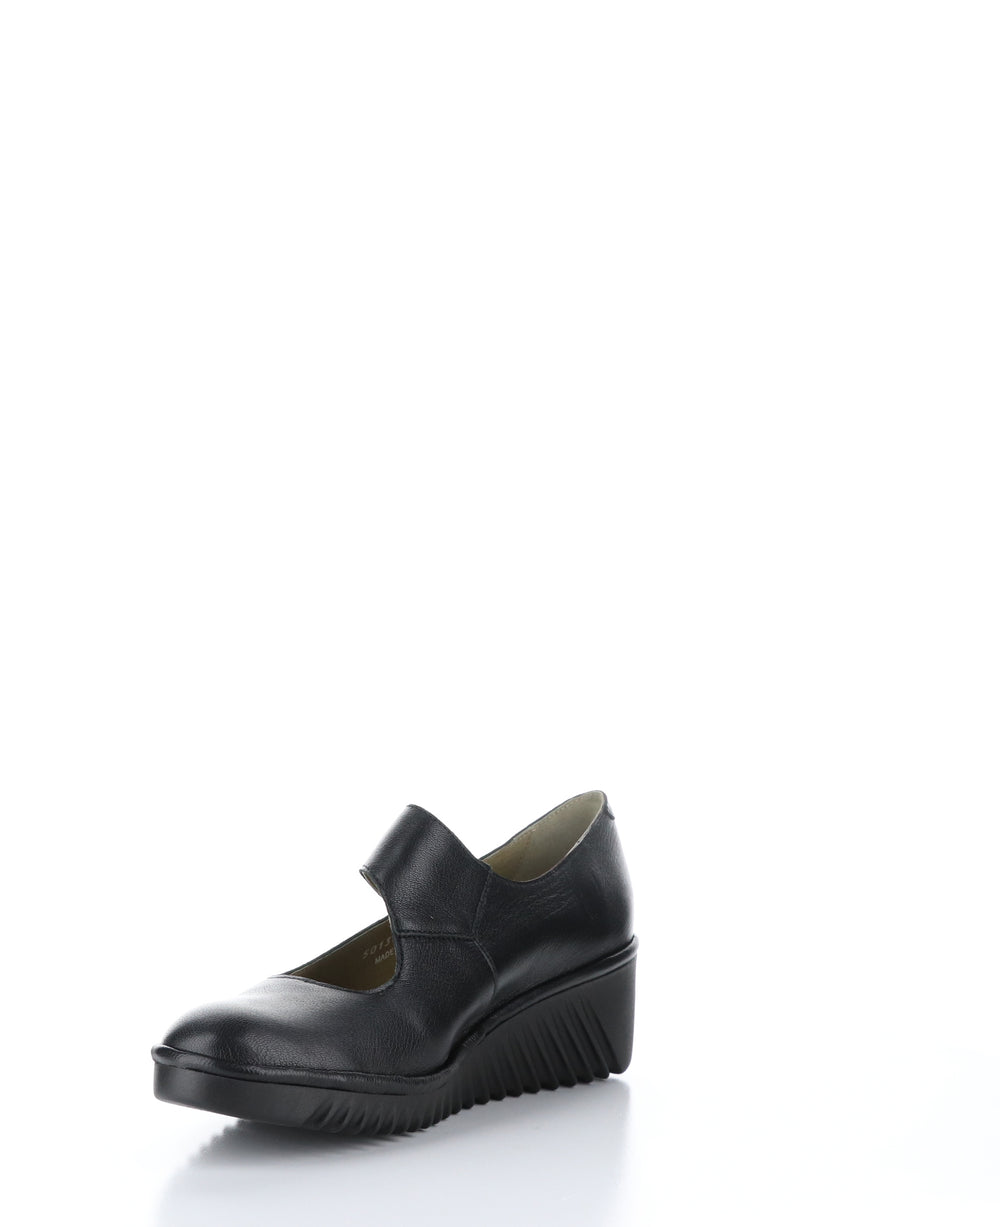 LYKA350FLY Black Round Toe Shoes|LYKA350FLY Chaussures à Bout Rond in Noir